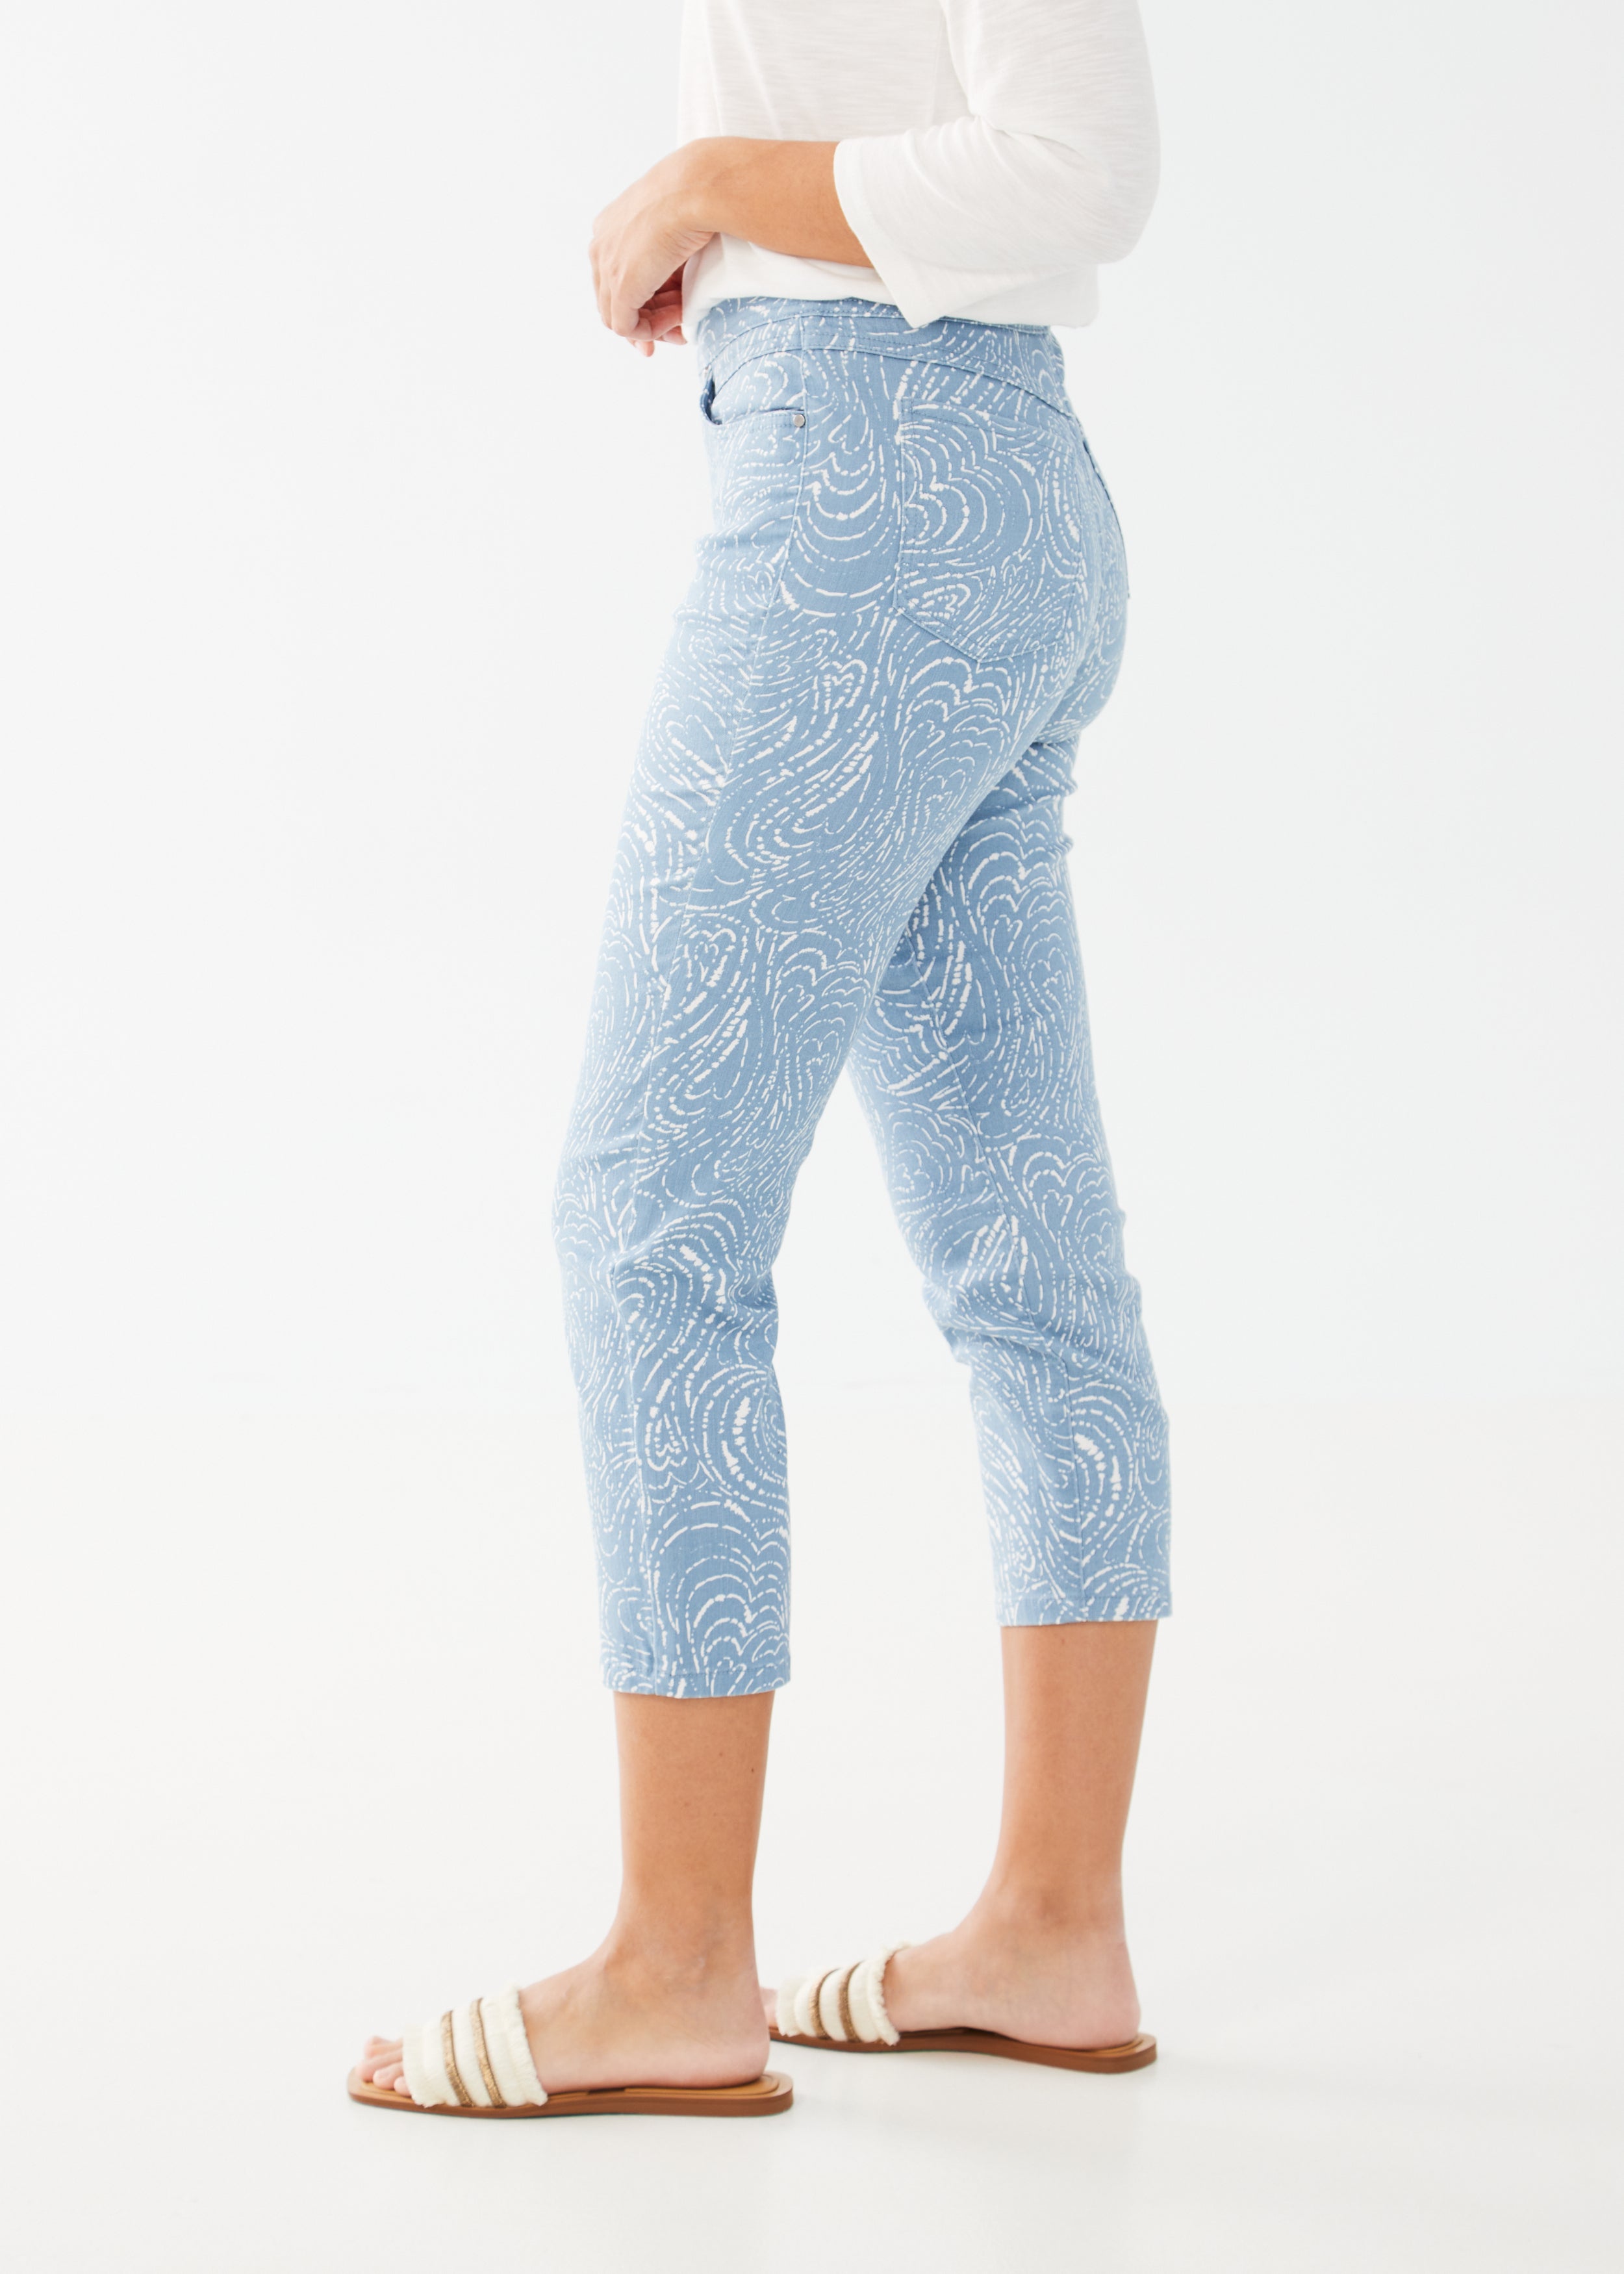 Get ready to make a statement with the FDJ Pull-On Slim Crop Pant! Featuring a striking Trapped Hearts print, these pants are sure to turn heads. Designed with a slim fit and pull-on style, they offer both comfort and style. Elevate your wardrobe with this must-have piece.